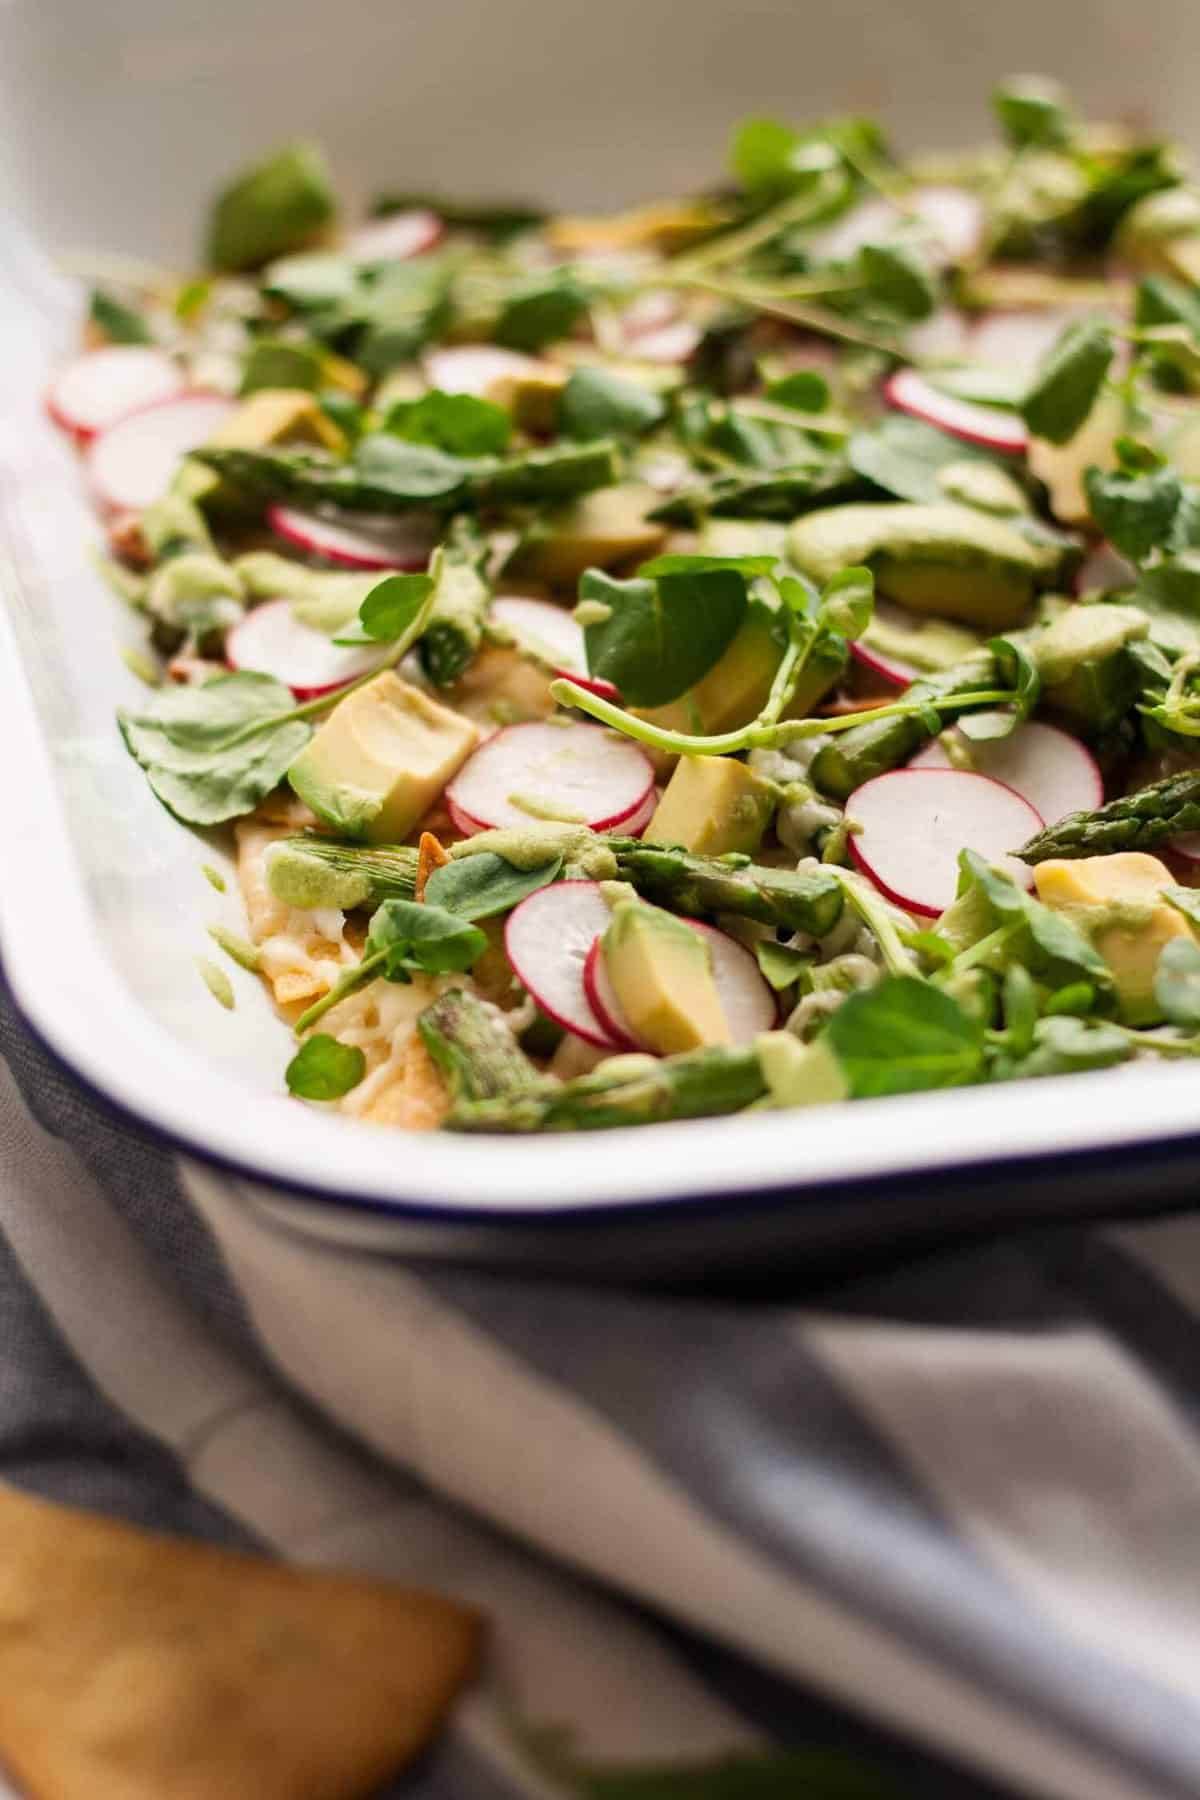 Healthy Asparagus Nachos - this light and fresh asparagus nacho recipe tastes just as indulgent as regular nachos, but without weighing heavy on the stomach. Win! | eatloveeats.com